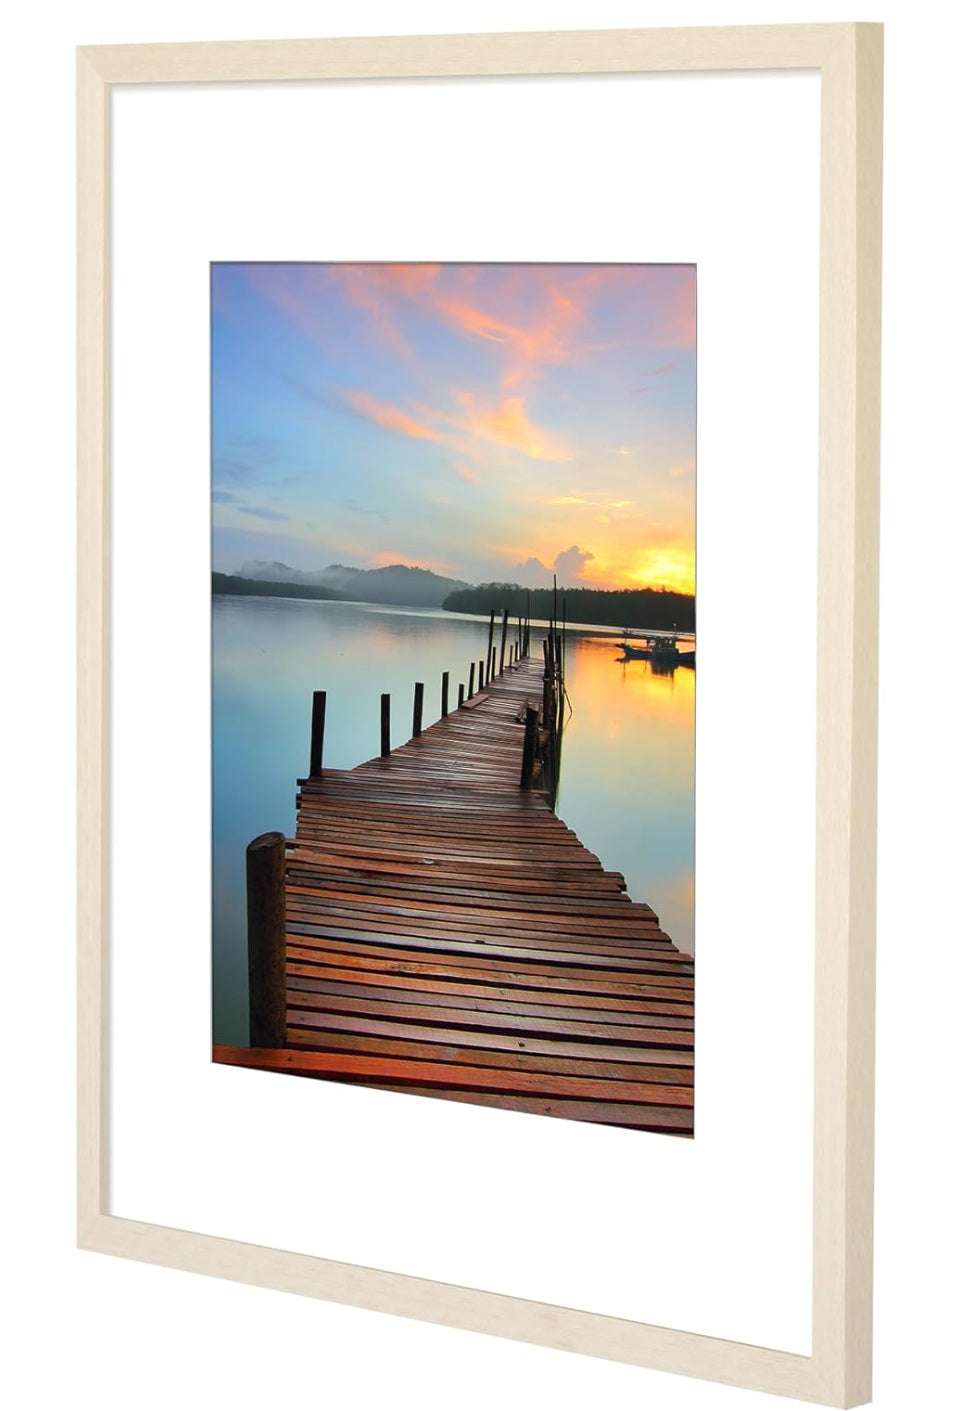 Sindcom 16x20 Poster Frame 3 Pack, Picture Frames with Detachable Mat for 11x14 Prints, Horizontal and Vertical Hanging Hooks for Wall Mounting, Natural Photo - Selzalot